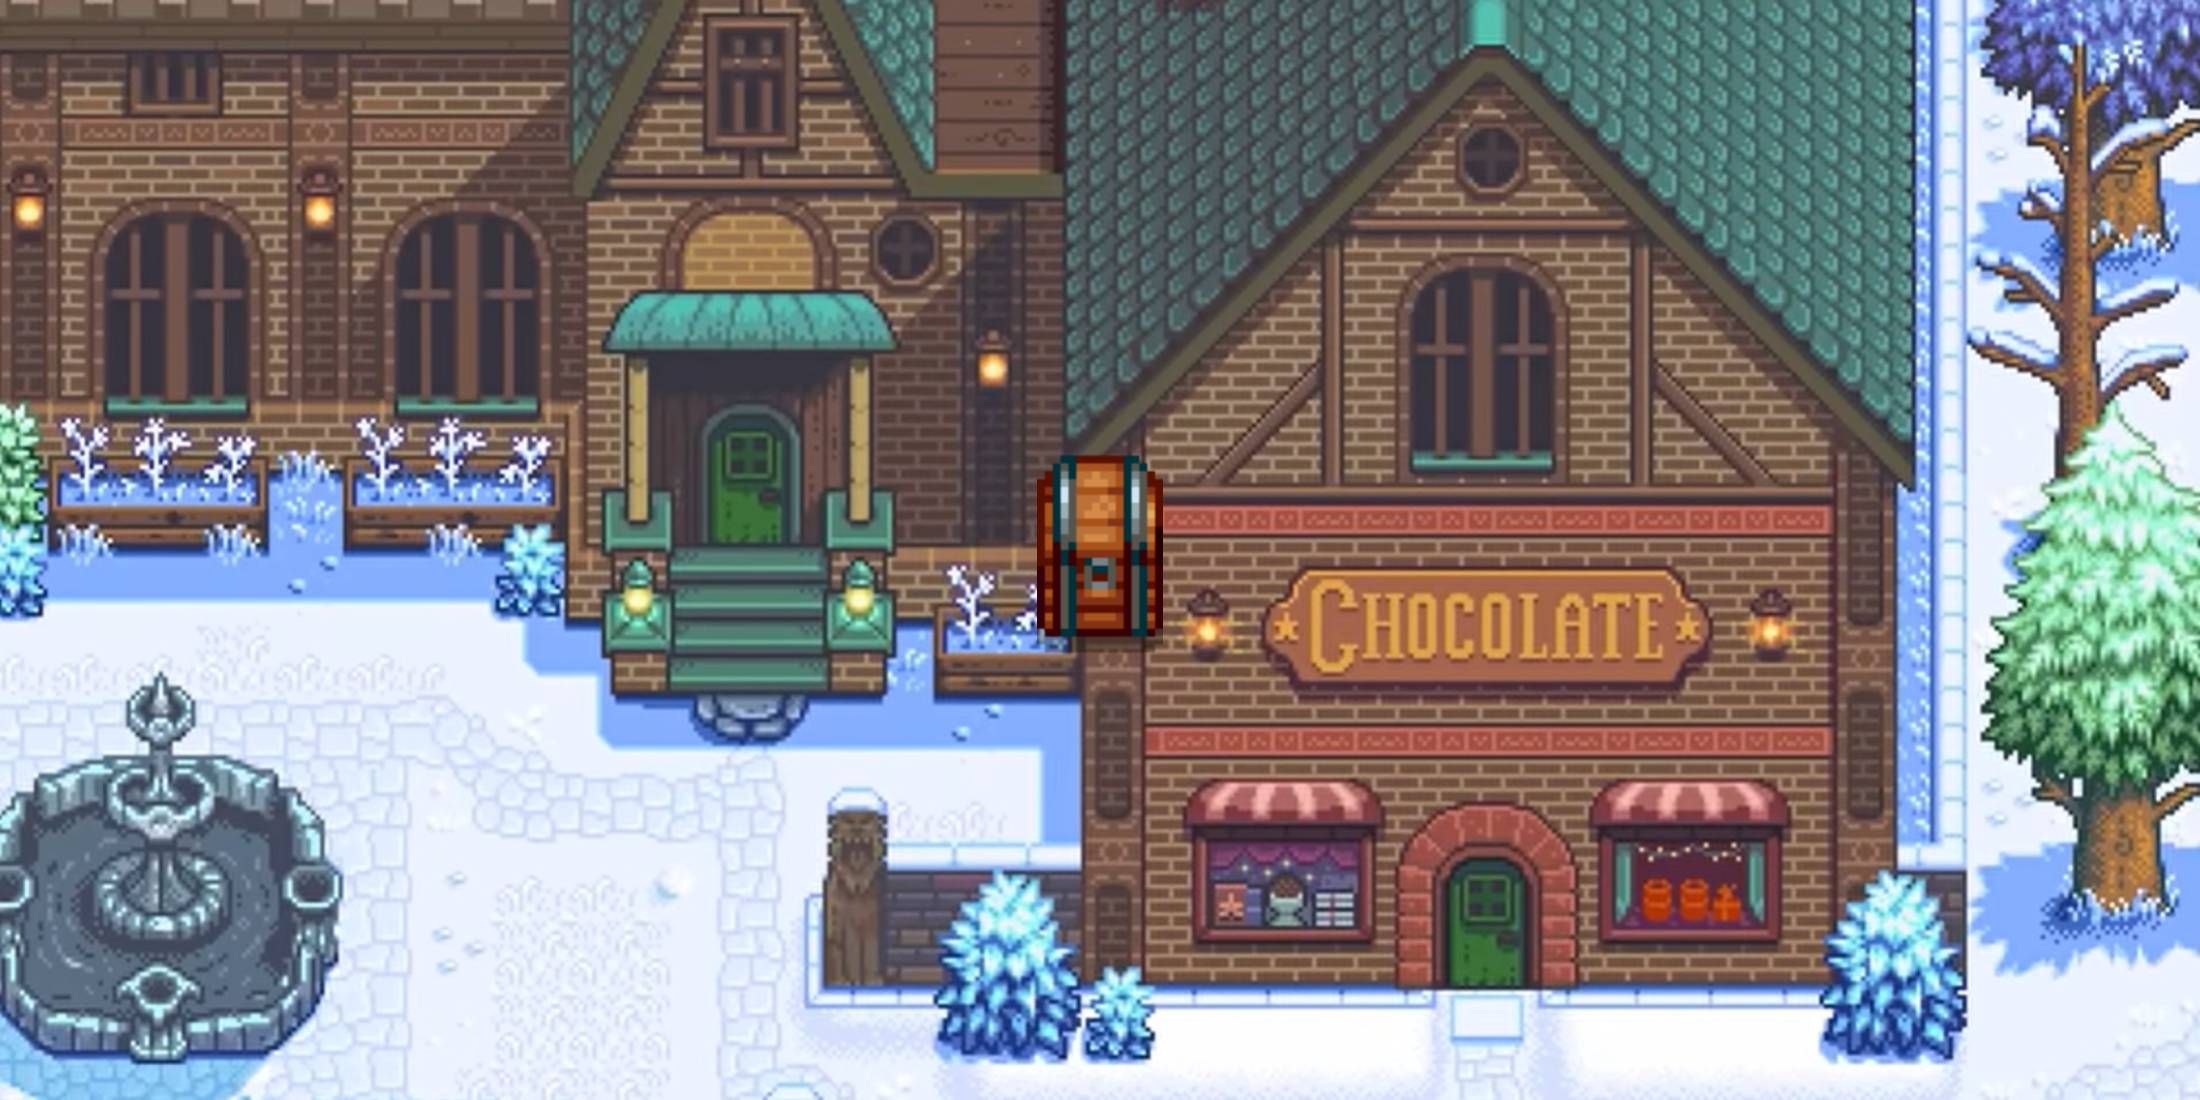 A chest from Stardew Valley in front of the shop from Haunted Chocolatier